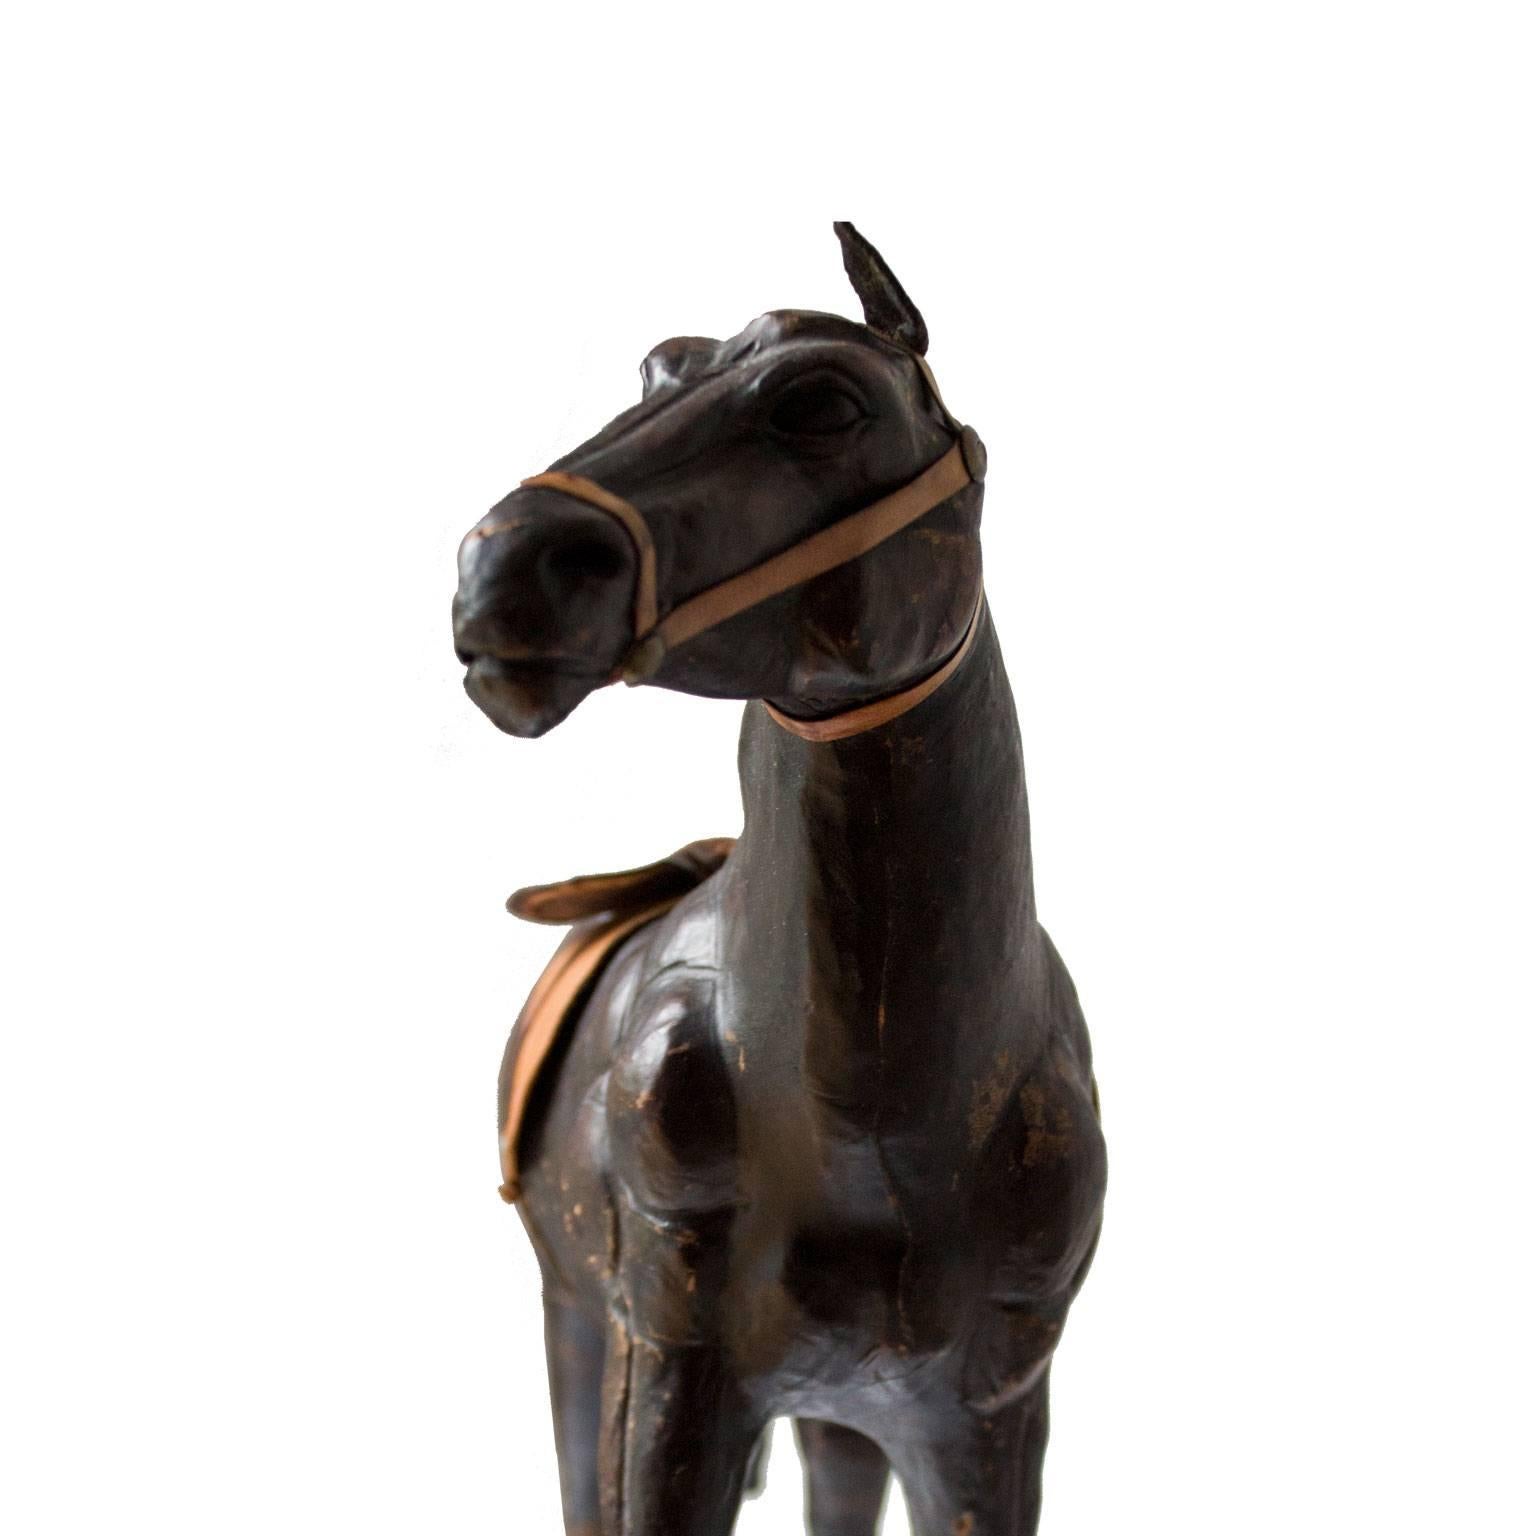 Wonderful interior accessories. This horse sculpture were likely produced circa mid-20th century in Italy. A vintage sculpture representing a horse wrapped in dark brown leather, with glass eyes. Beautiful vintage condition with appropriate patina.